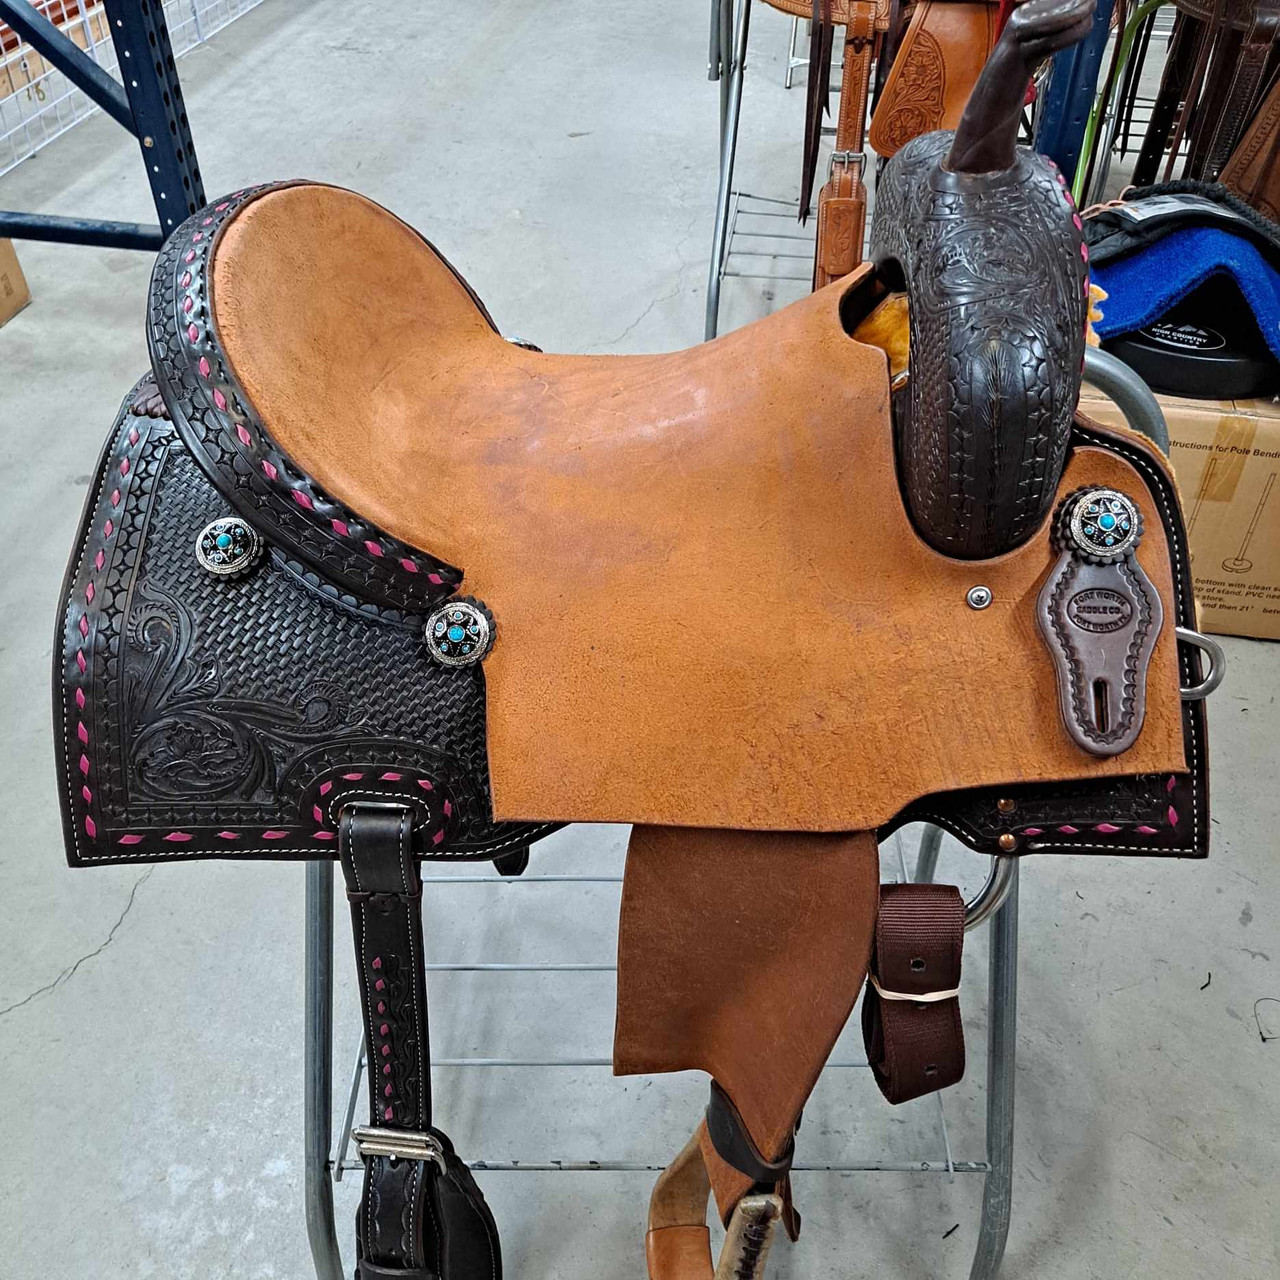 New Fort Worth Competitor Barrel Saddle by Fort Worth Saddle Co with 15.5 inch seat. S1696